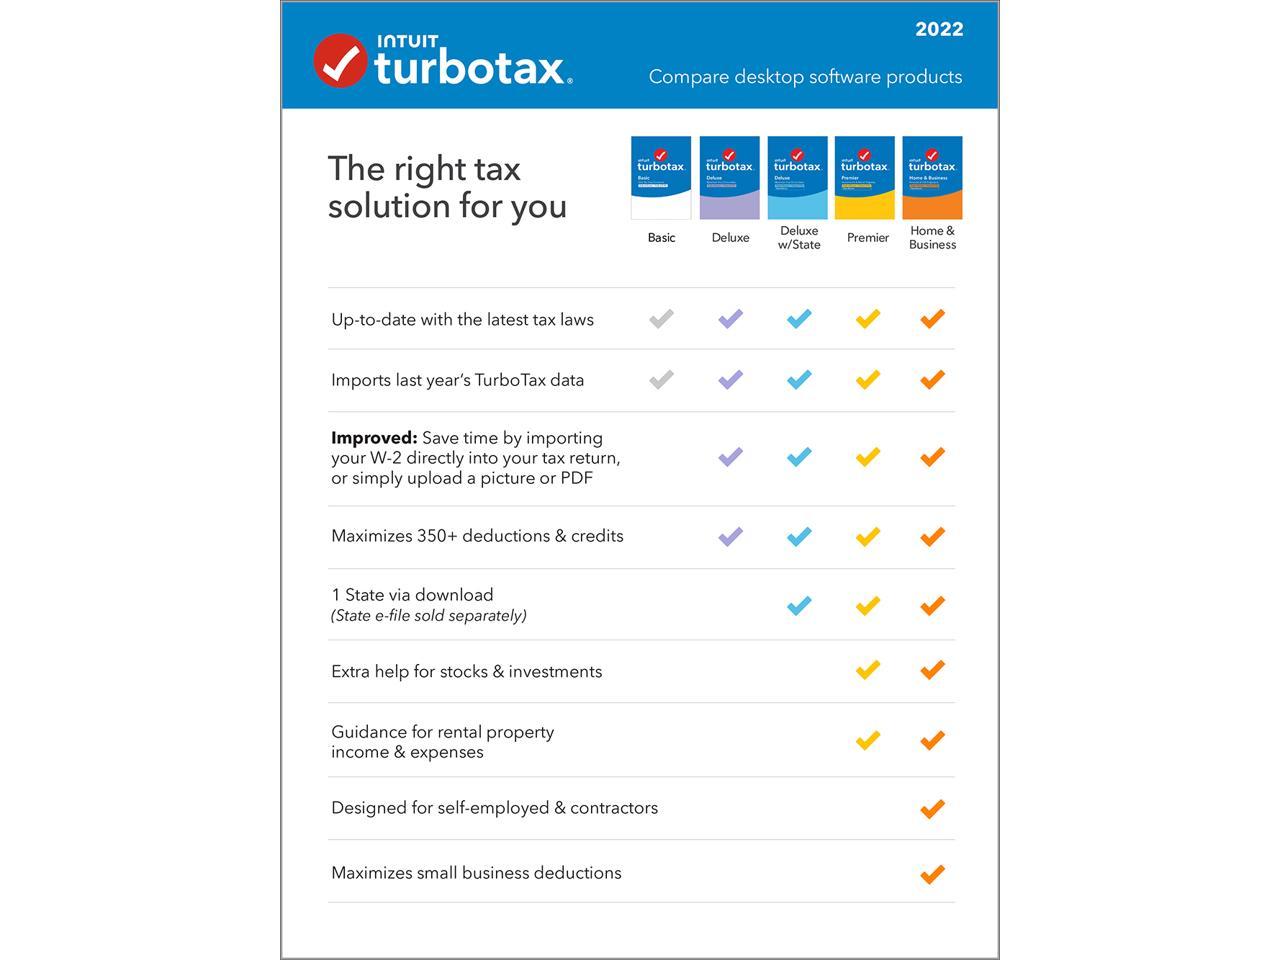 Intuit TurboTax Deluxe Federal & State 2022 PC/MAC Download